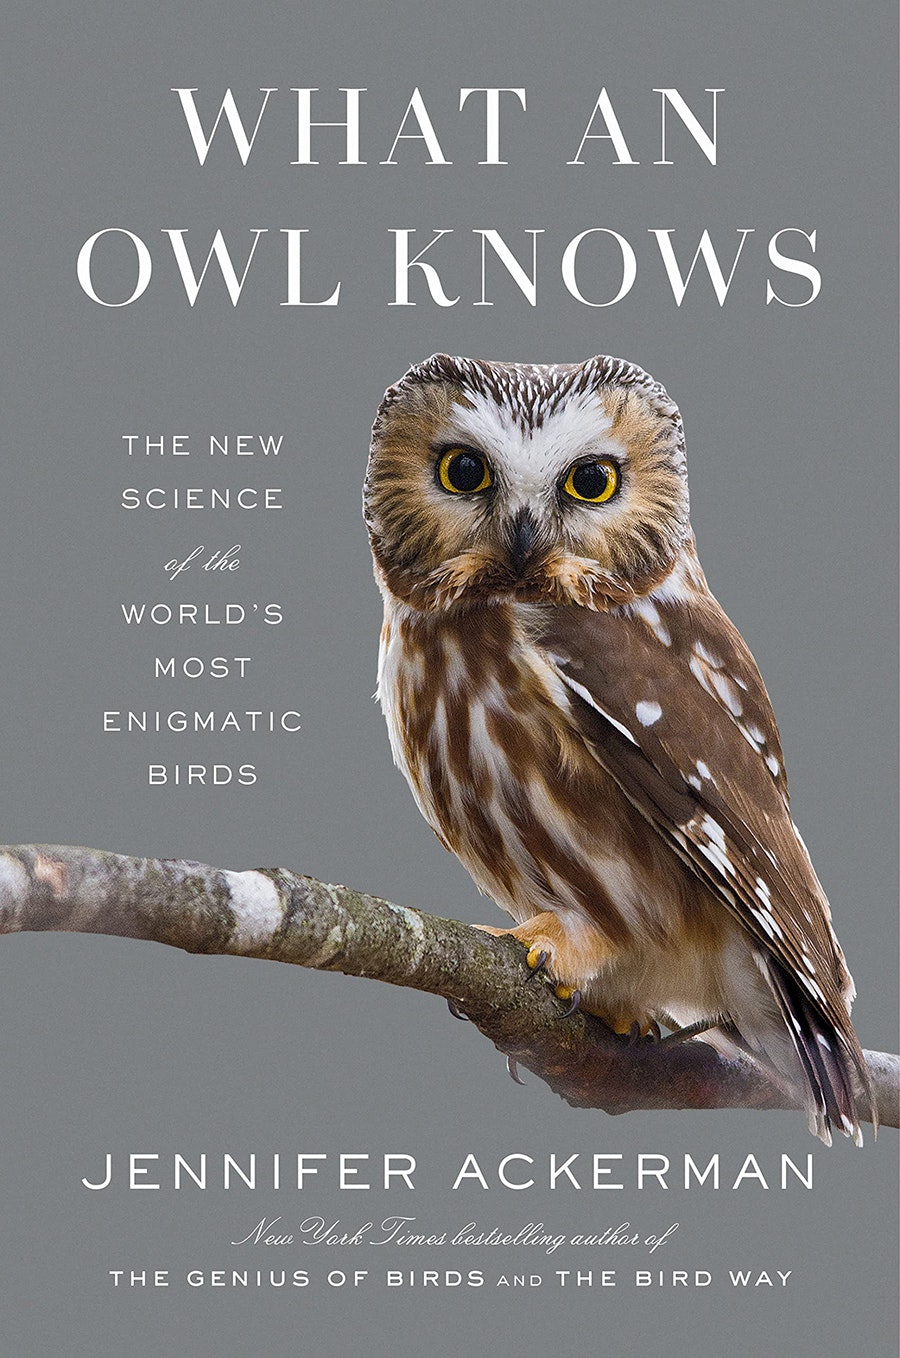 The cover of Ackerman's What An Owl Knows, which has a close-up photo of an owl standing on a branch